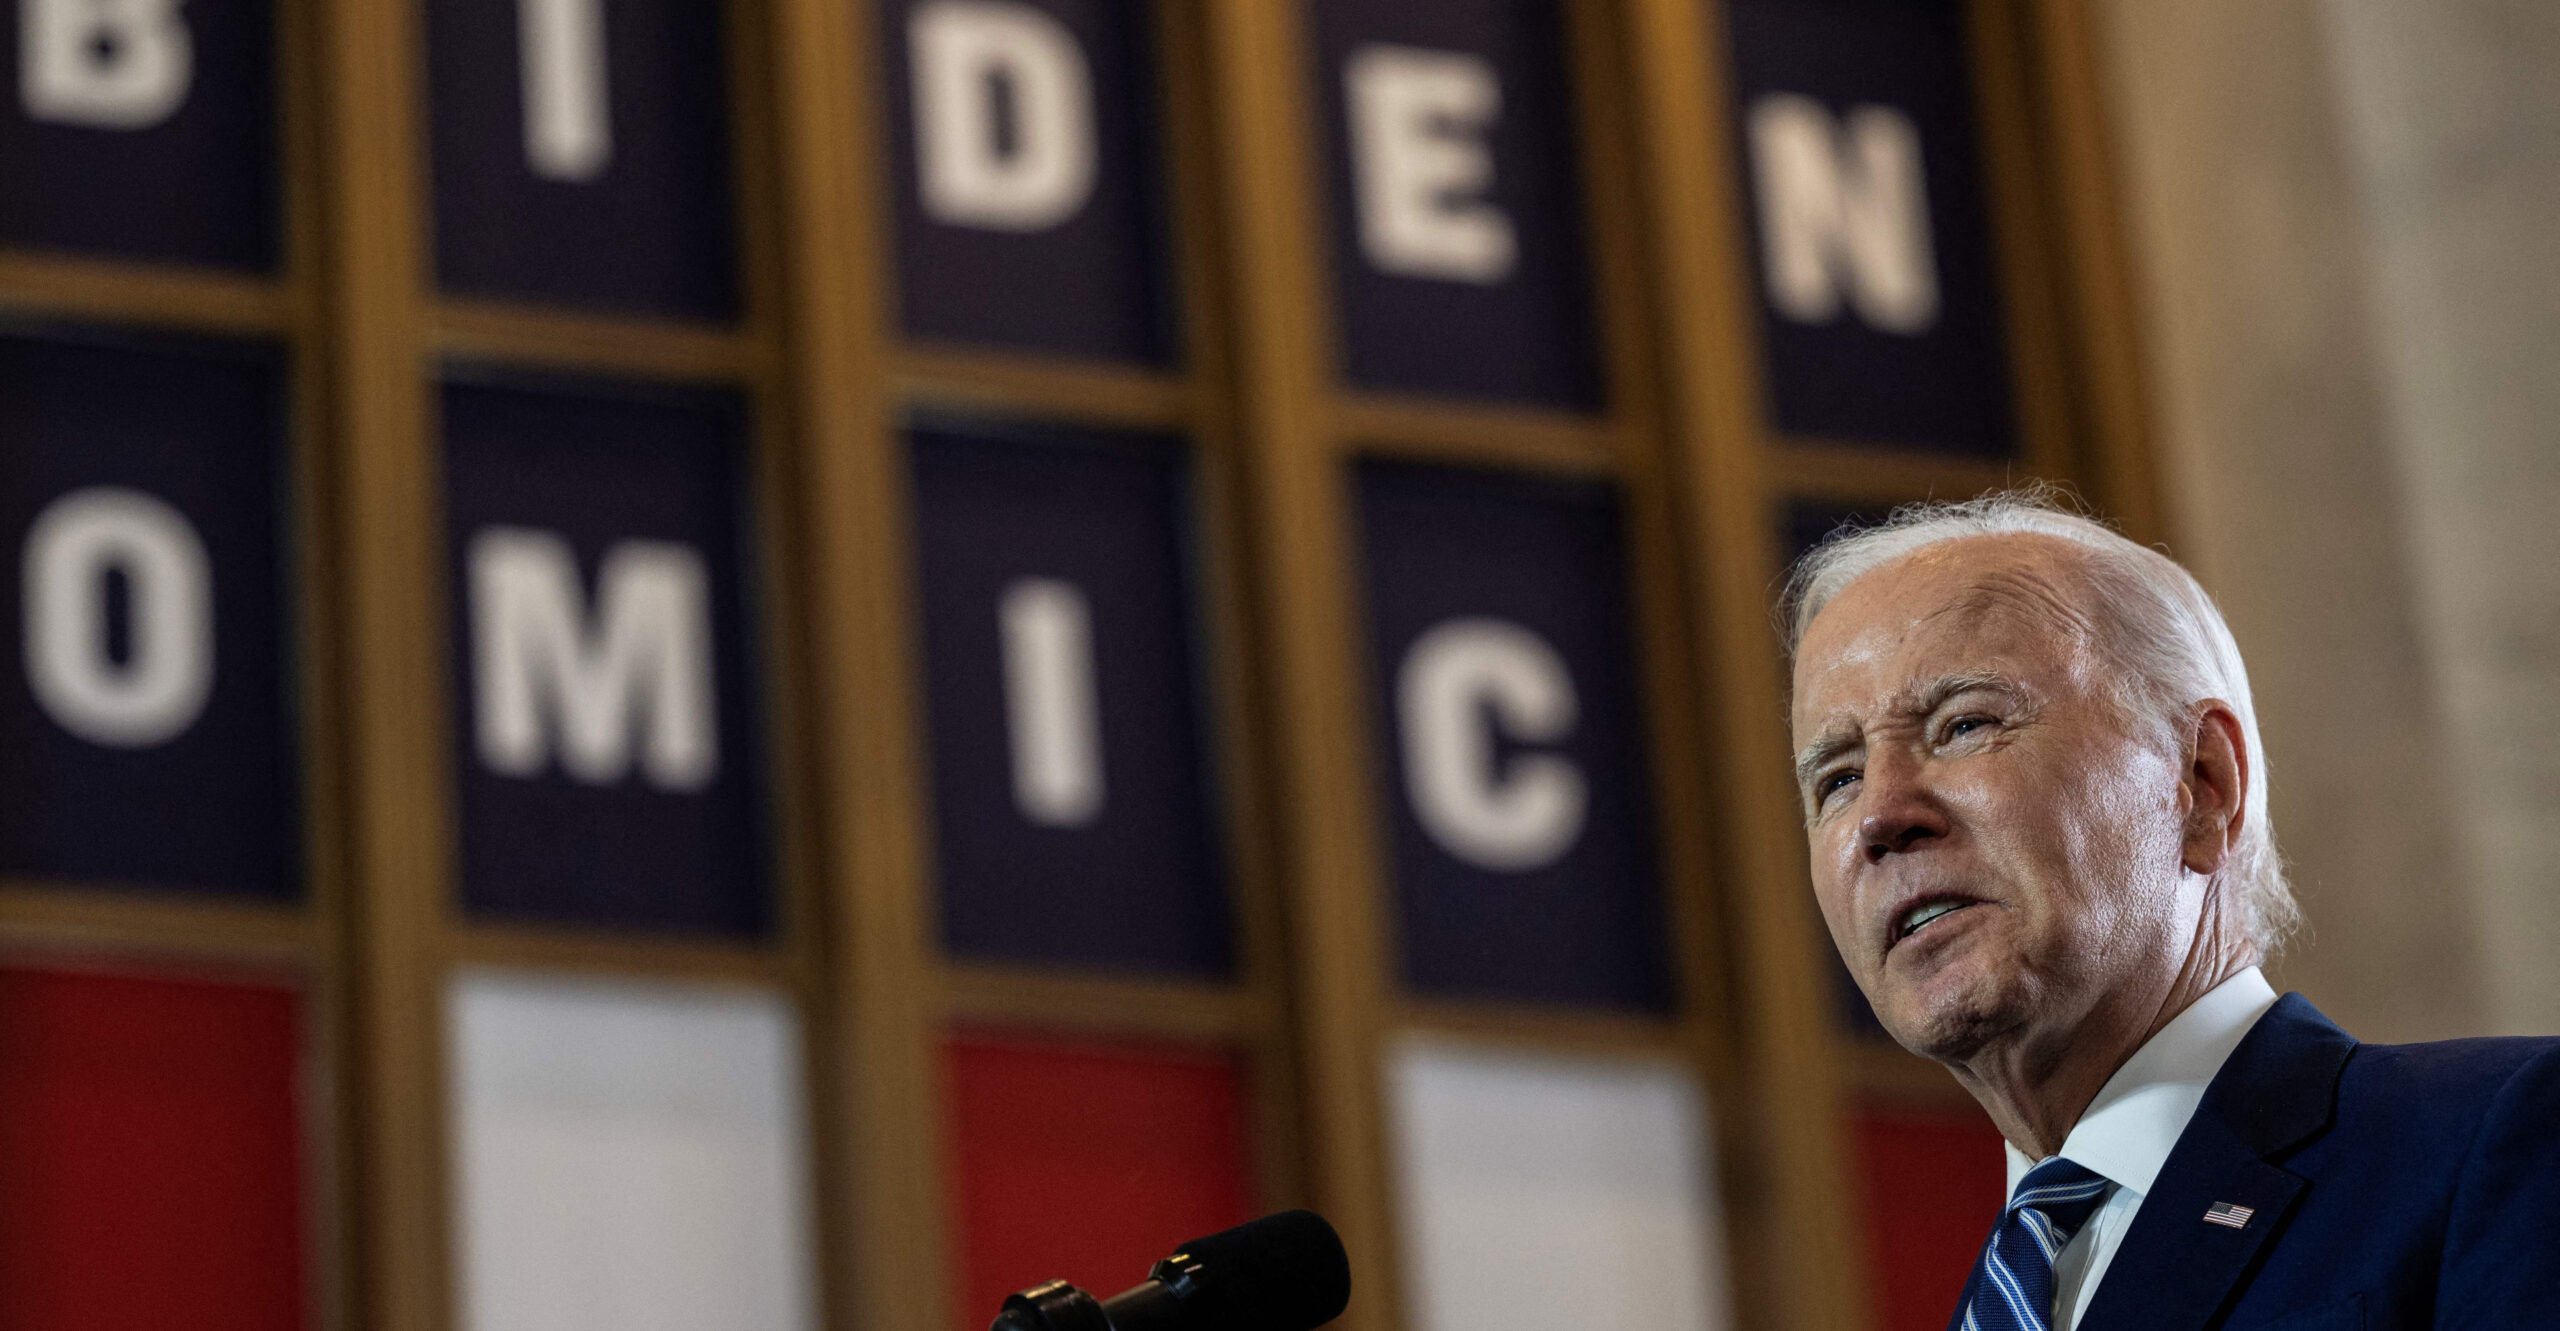 Fact Check: 5 Unusual, Unverifiable, or False Claims From President's 'Bidenomics' Speech